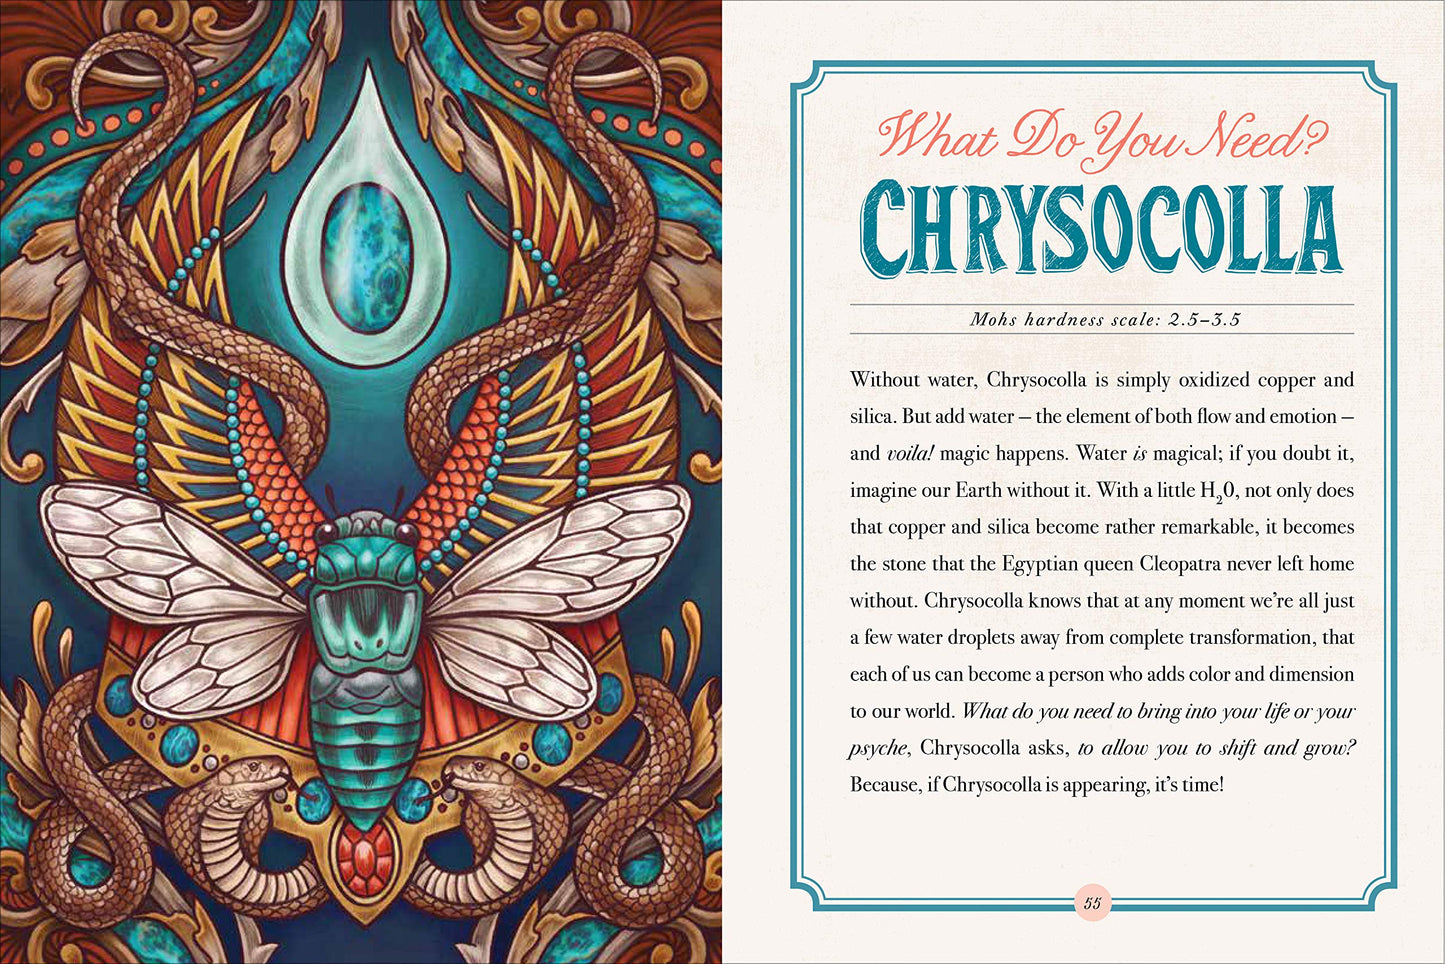 The Illustrated Crystallary: Guidance and Rituals from 36 Magical Gems & Minerals